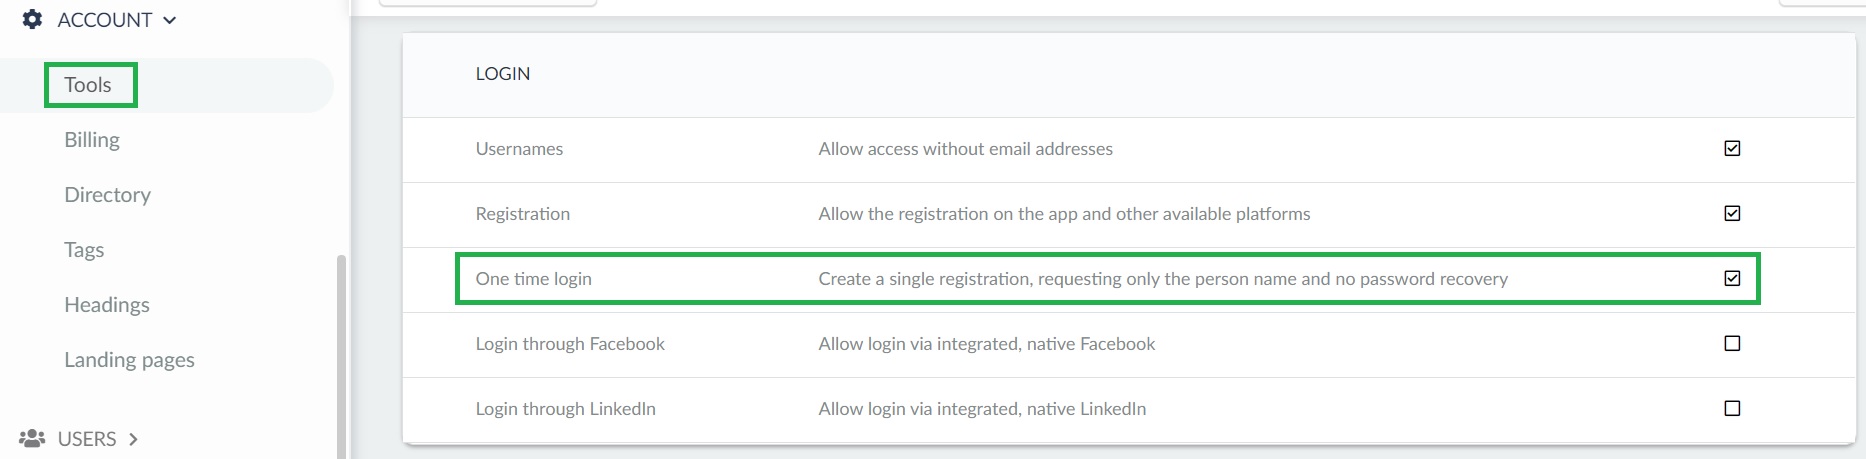 How to enable One time login at company level